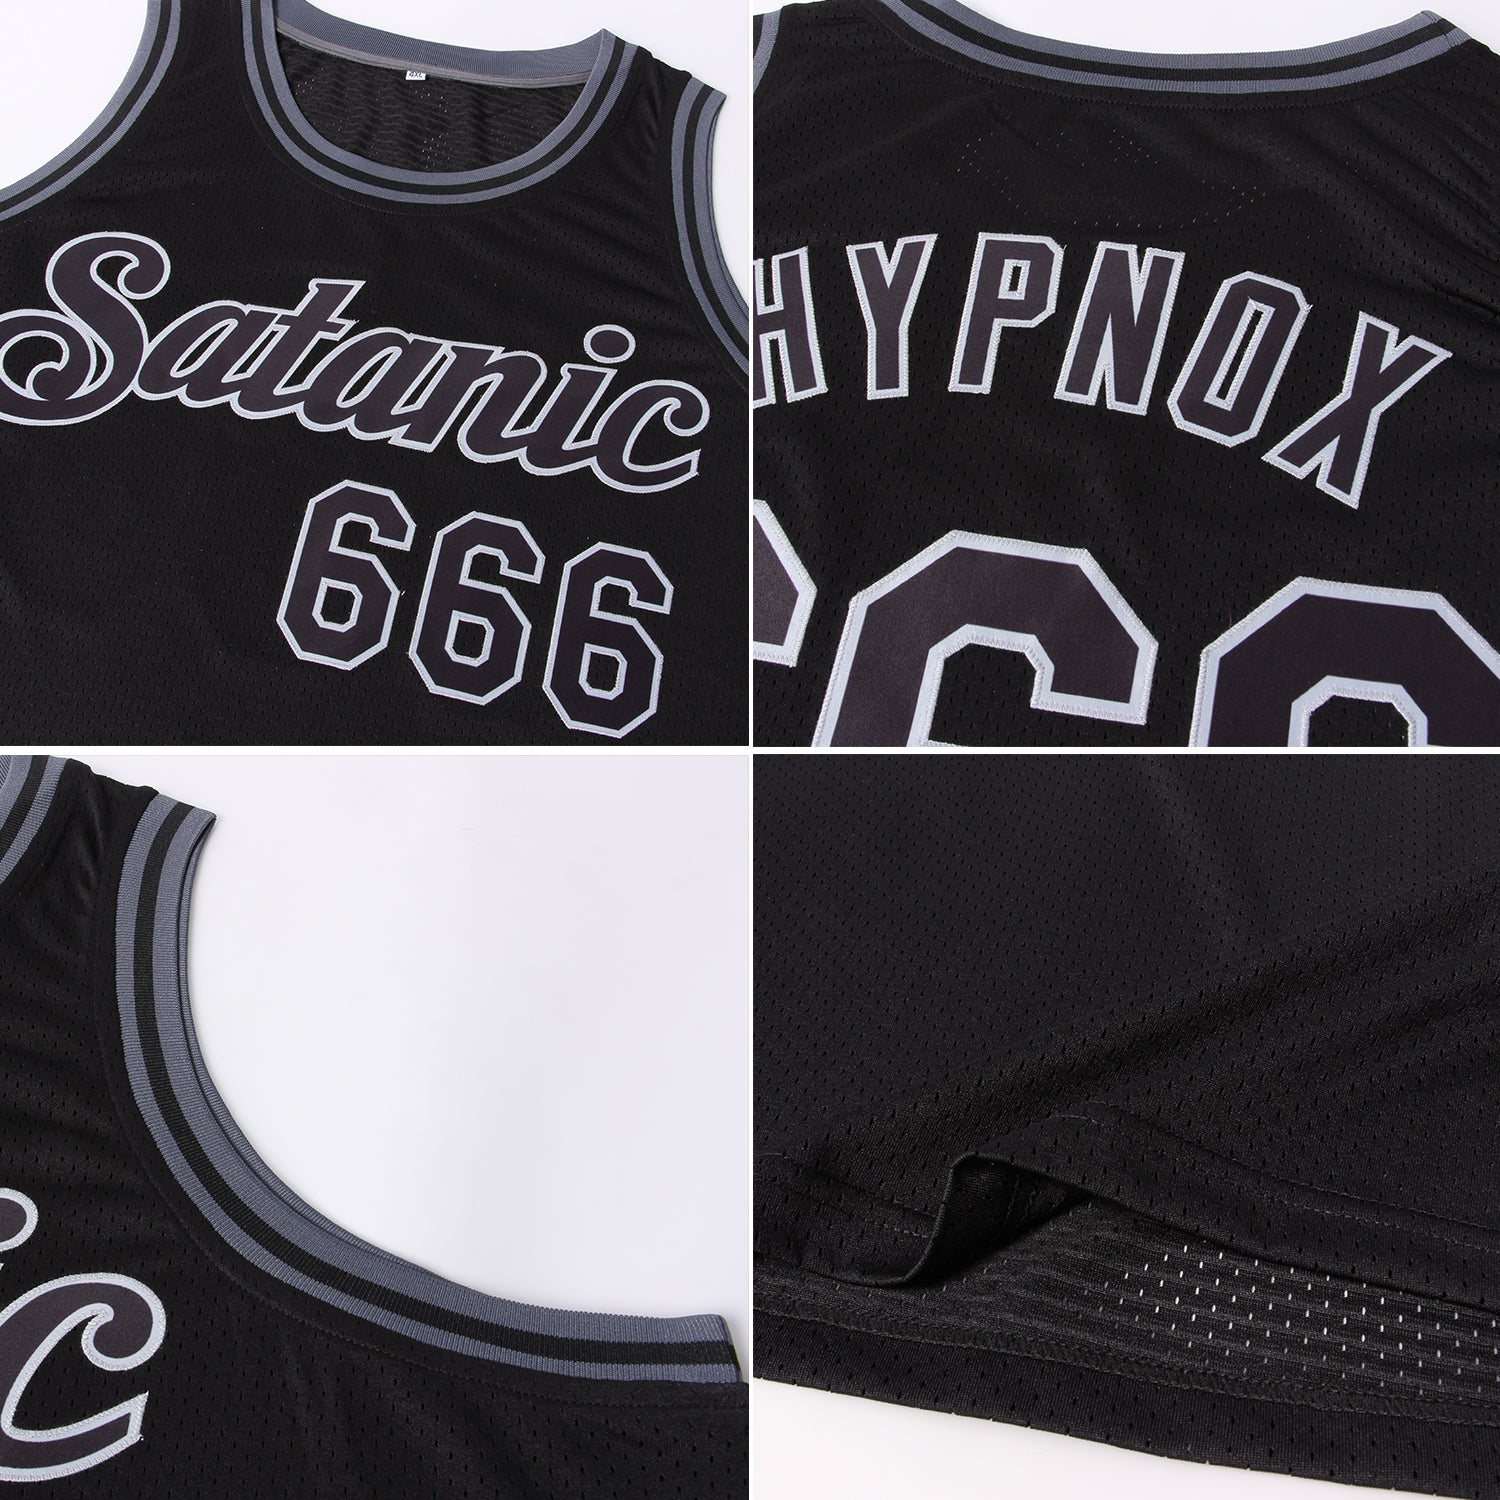 Custom Navy Gray-Blue Authentic Throwback Basketball Jersey